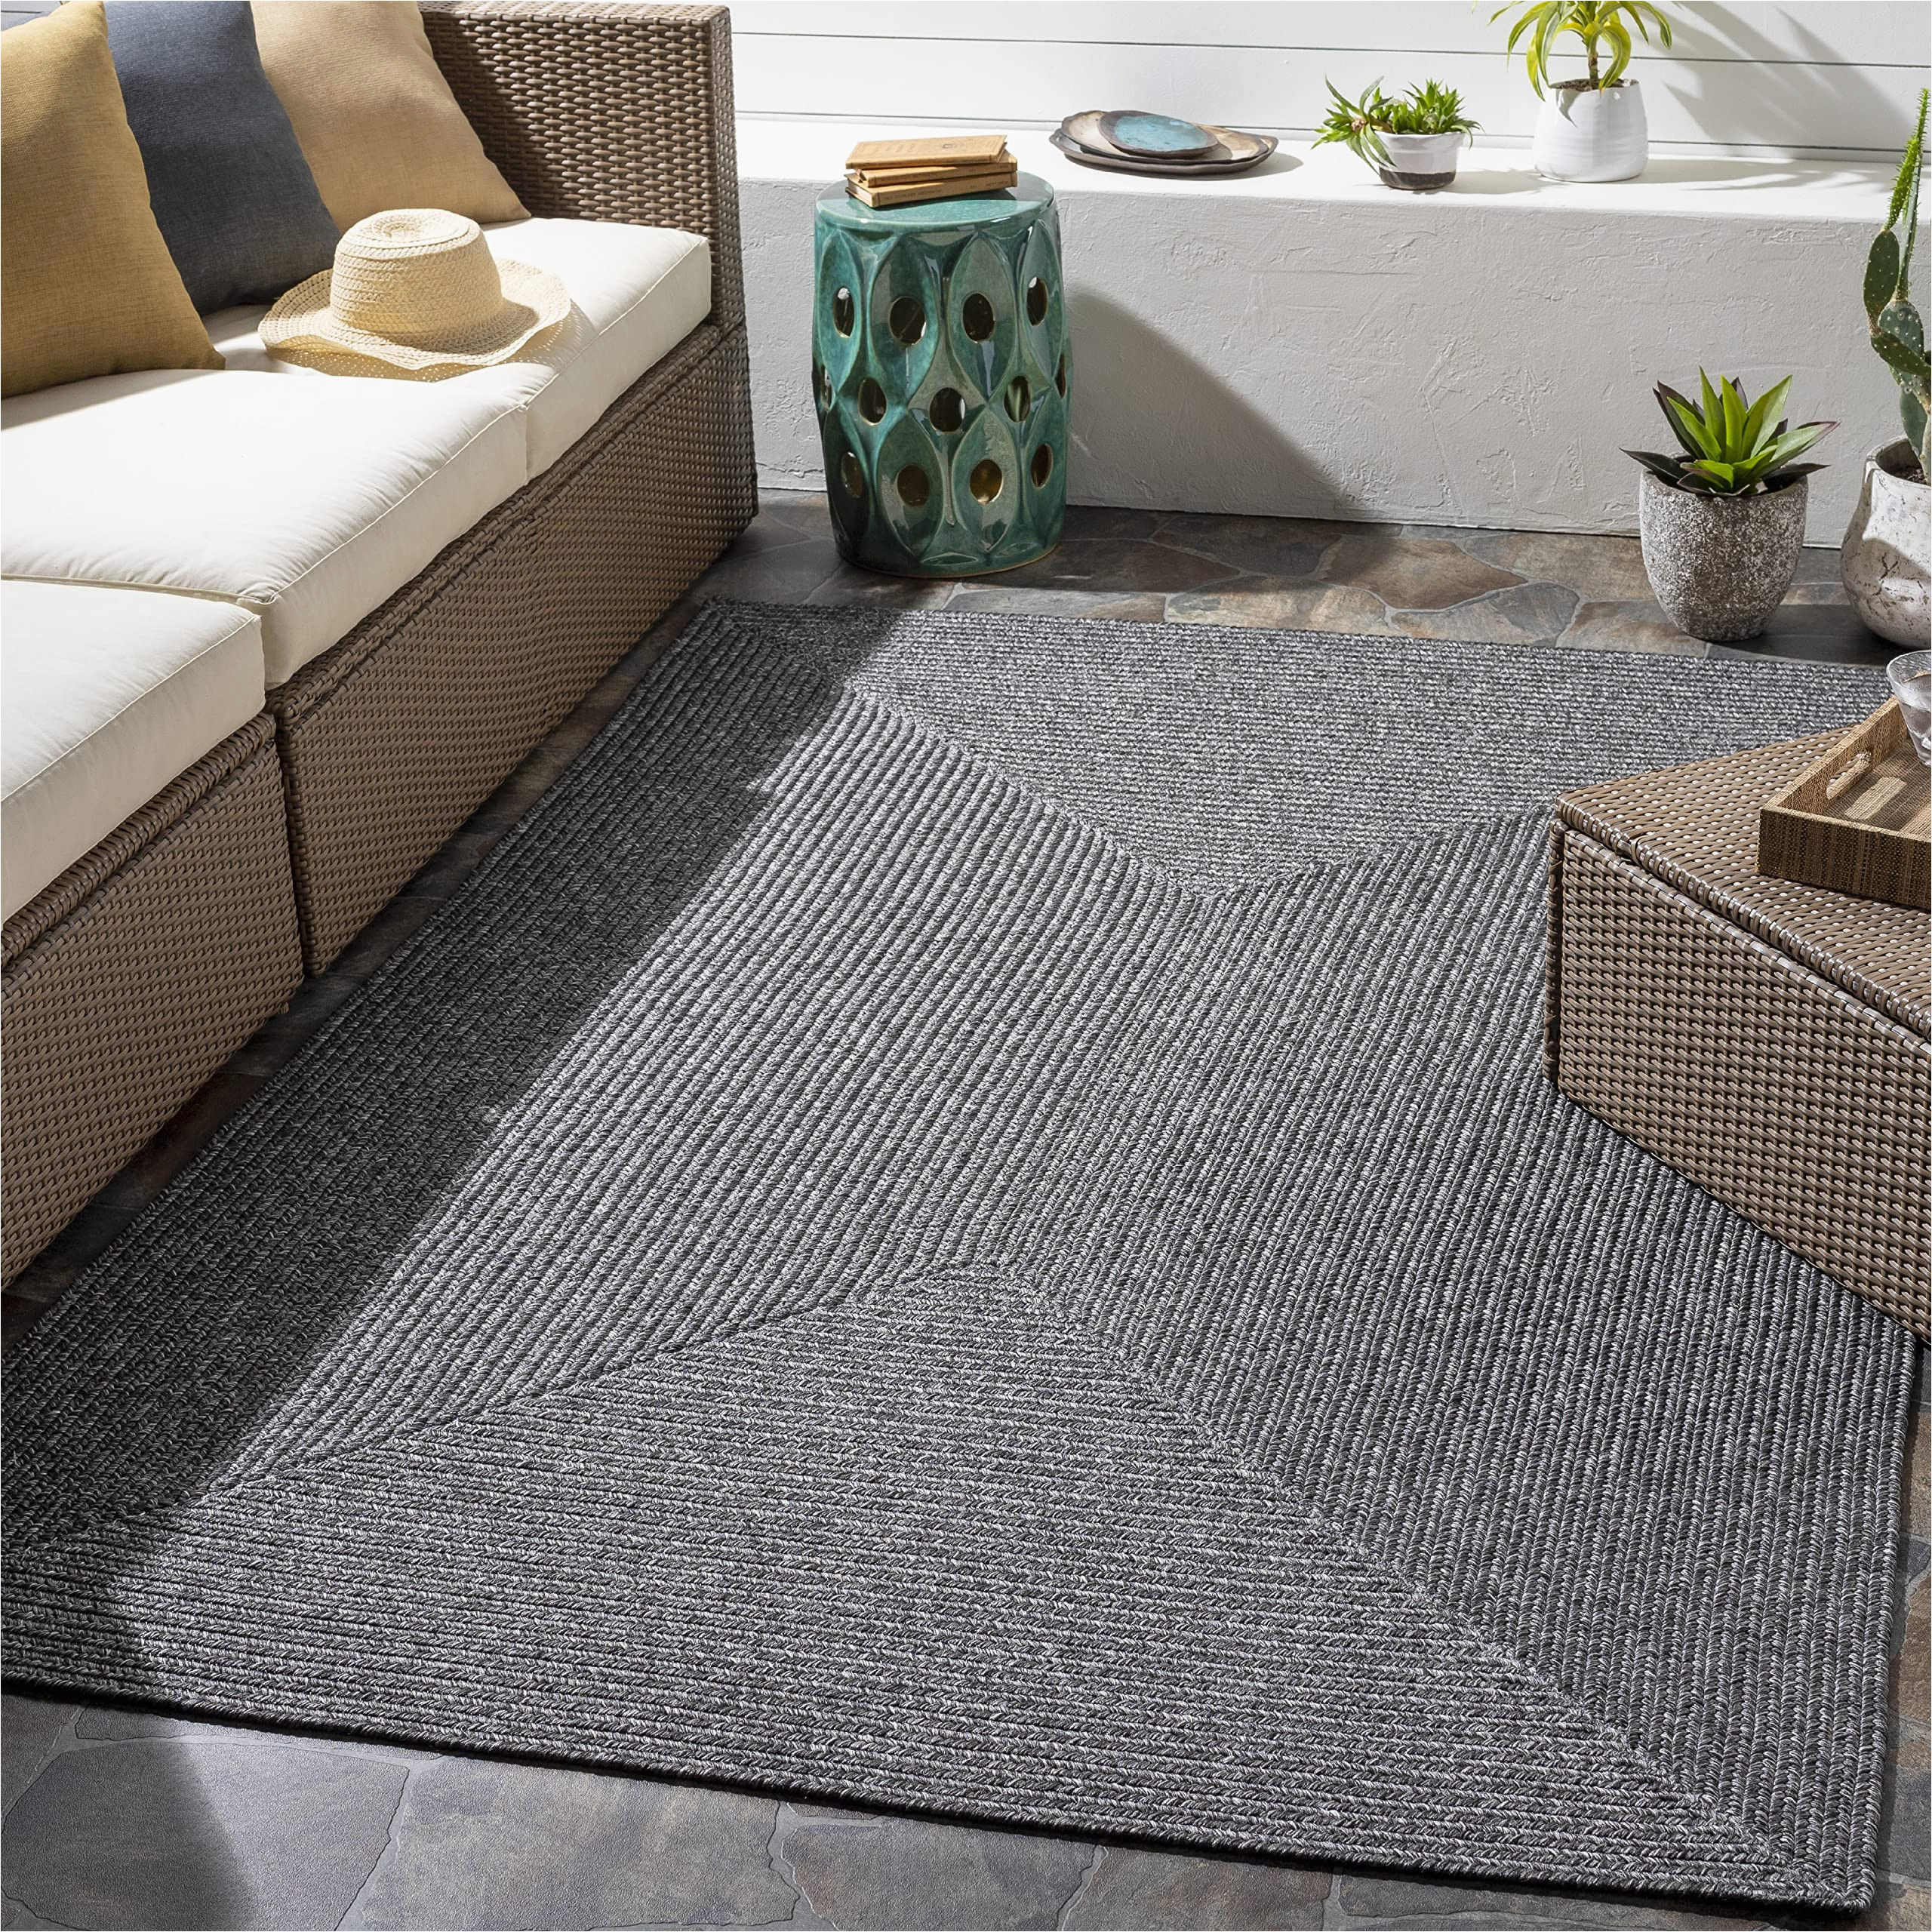 9×12 Indoor Outdoor area Rugs Mark&day area Rugs, 9×12 Cuijk Modern Charcoal Indoor/outdoor area Rug, Charcoal Carpet for Living Room, Bedroom or Kitchen (8’6″ X 11’6″)